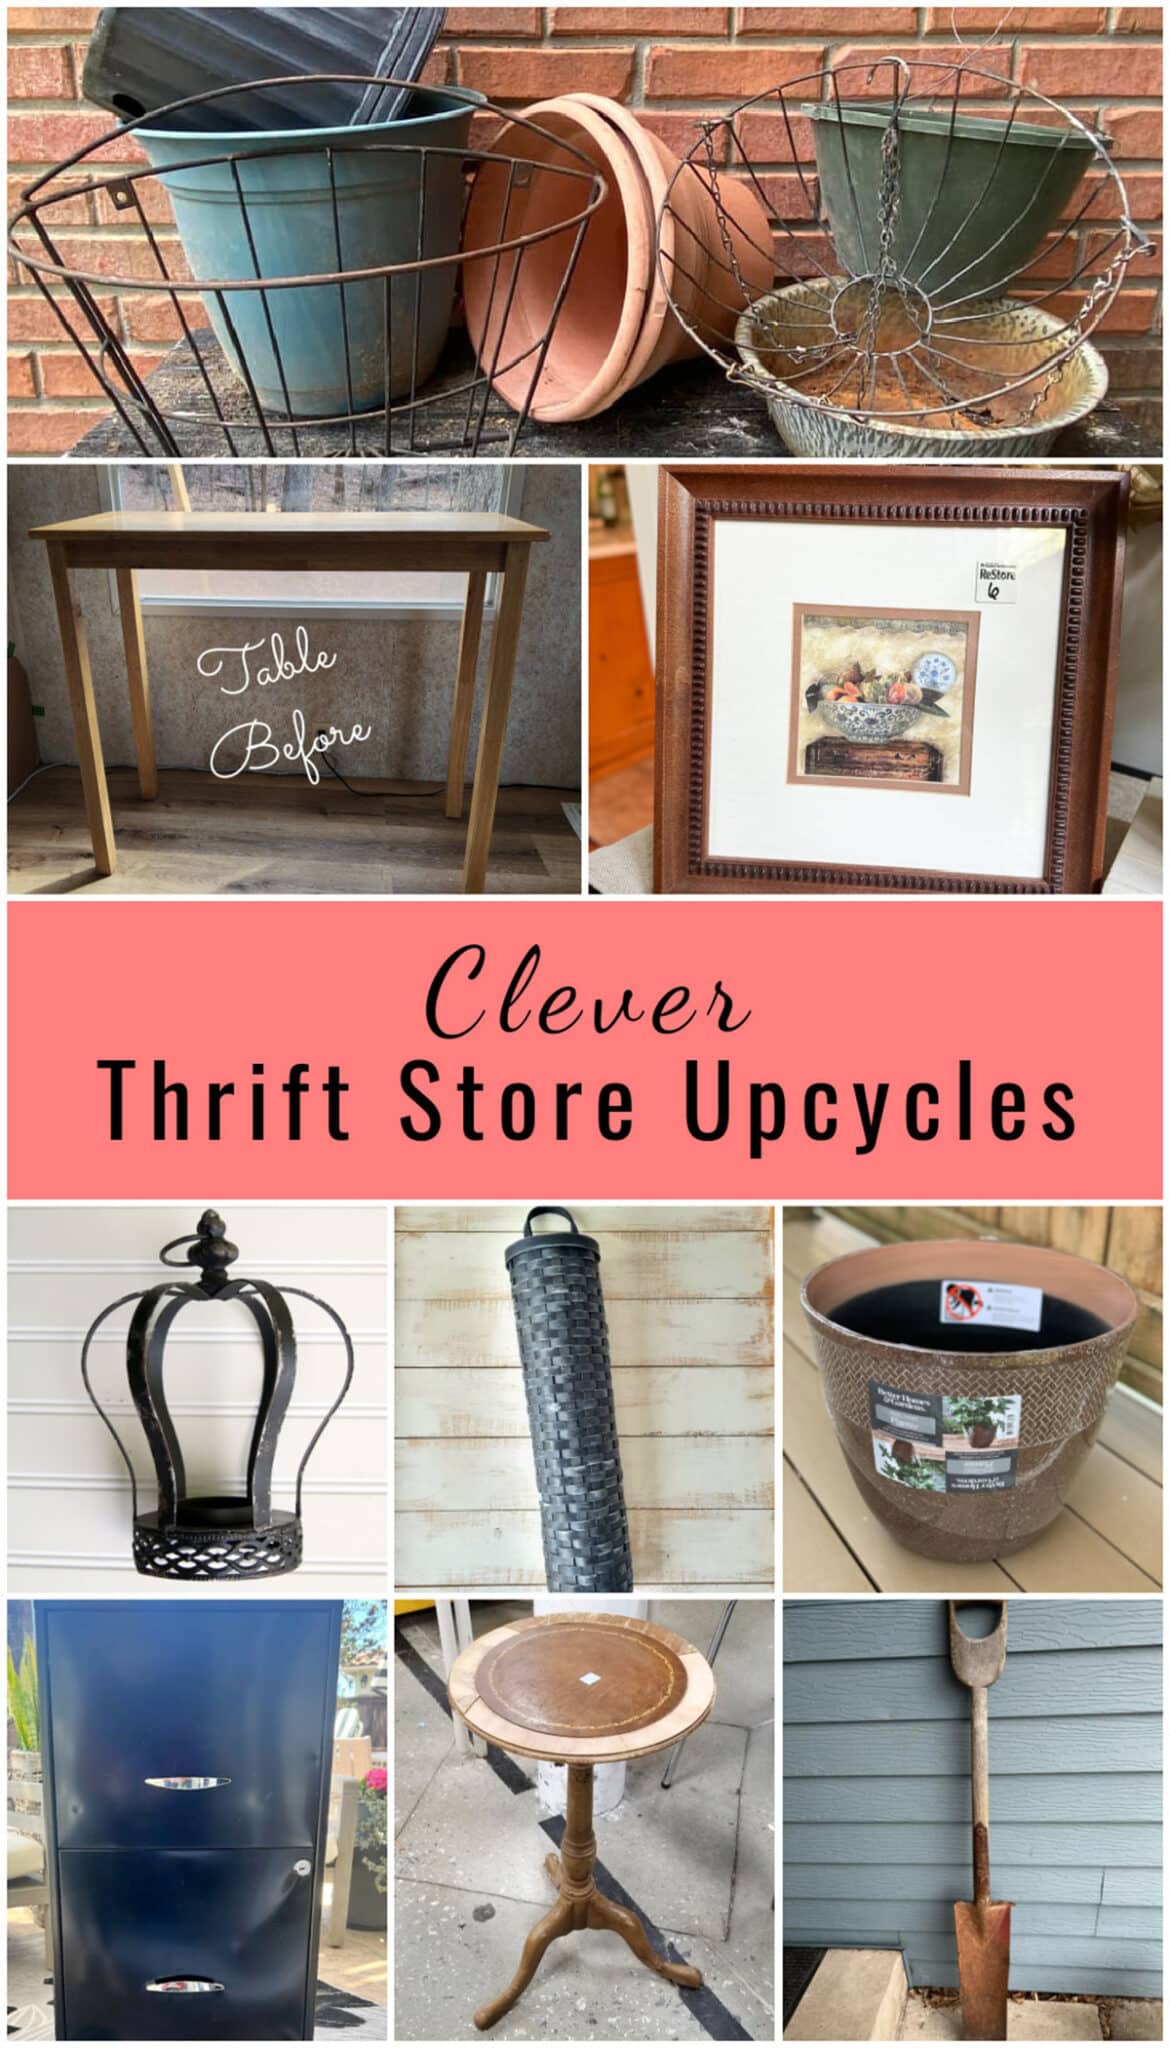 Thrift store finds upcycled into fun and clever home decor and garden items!